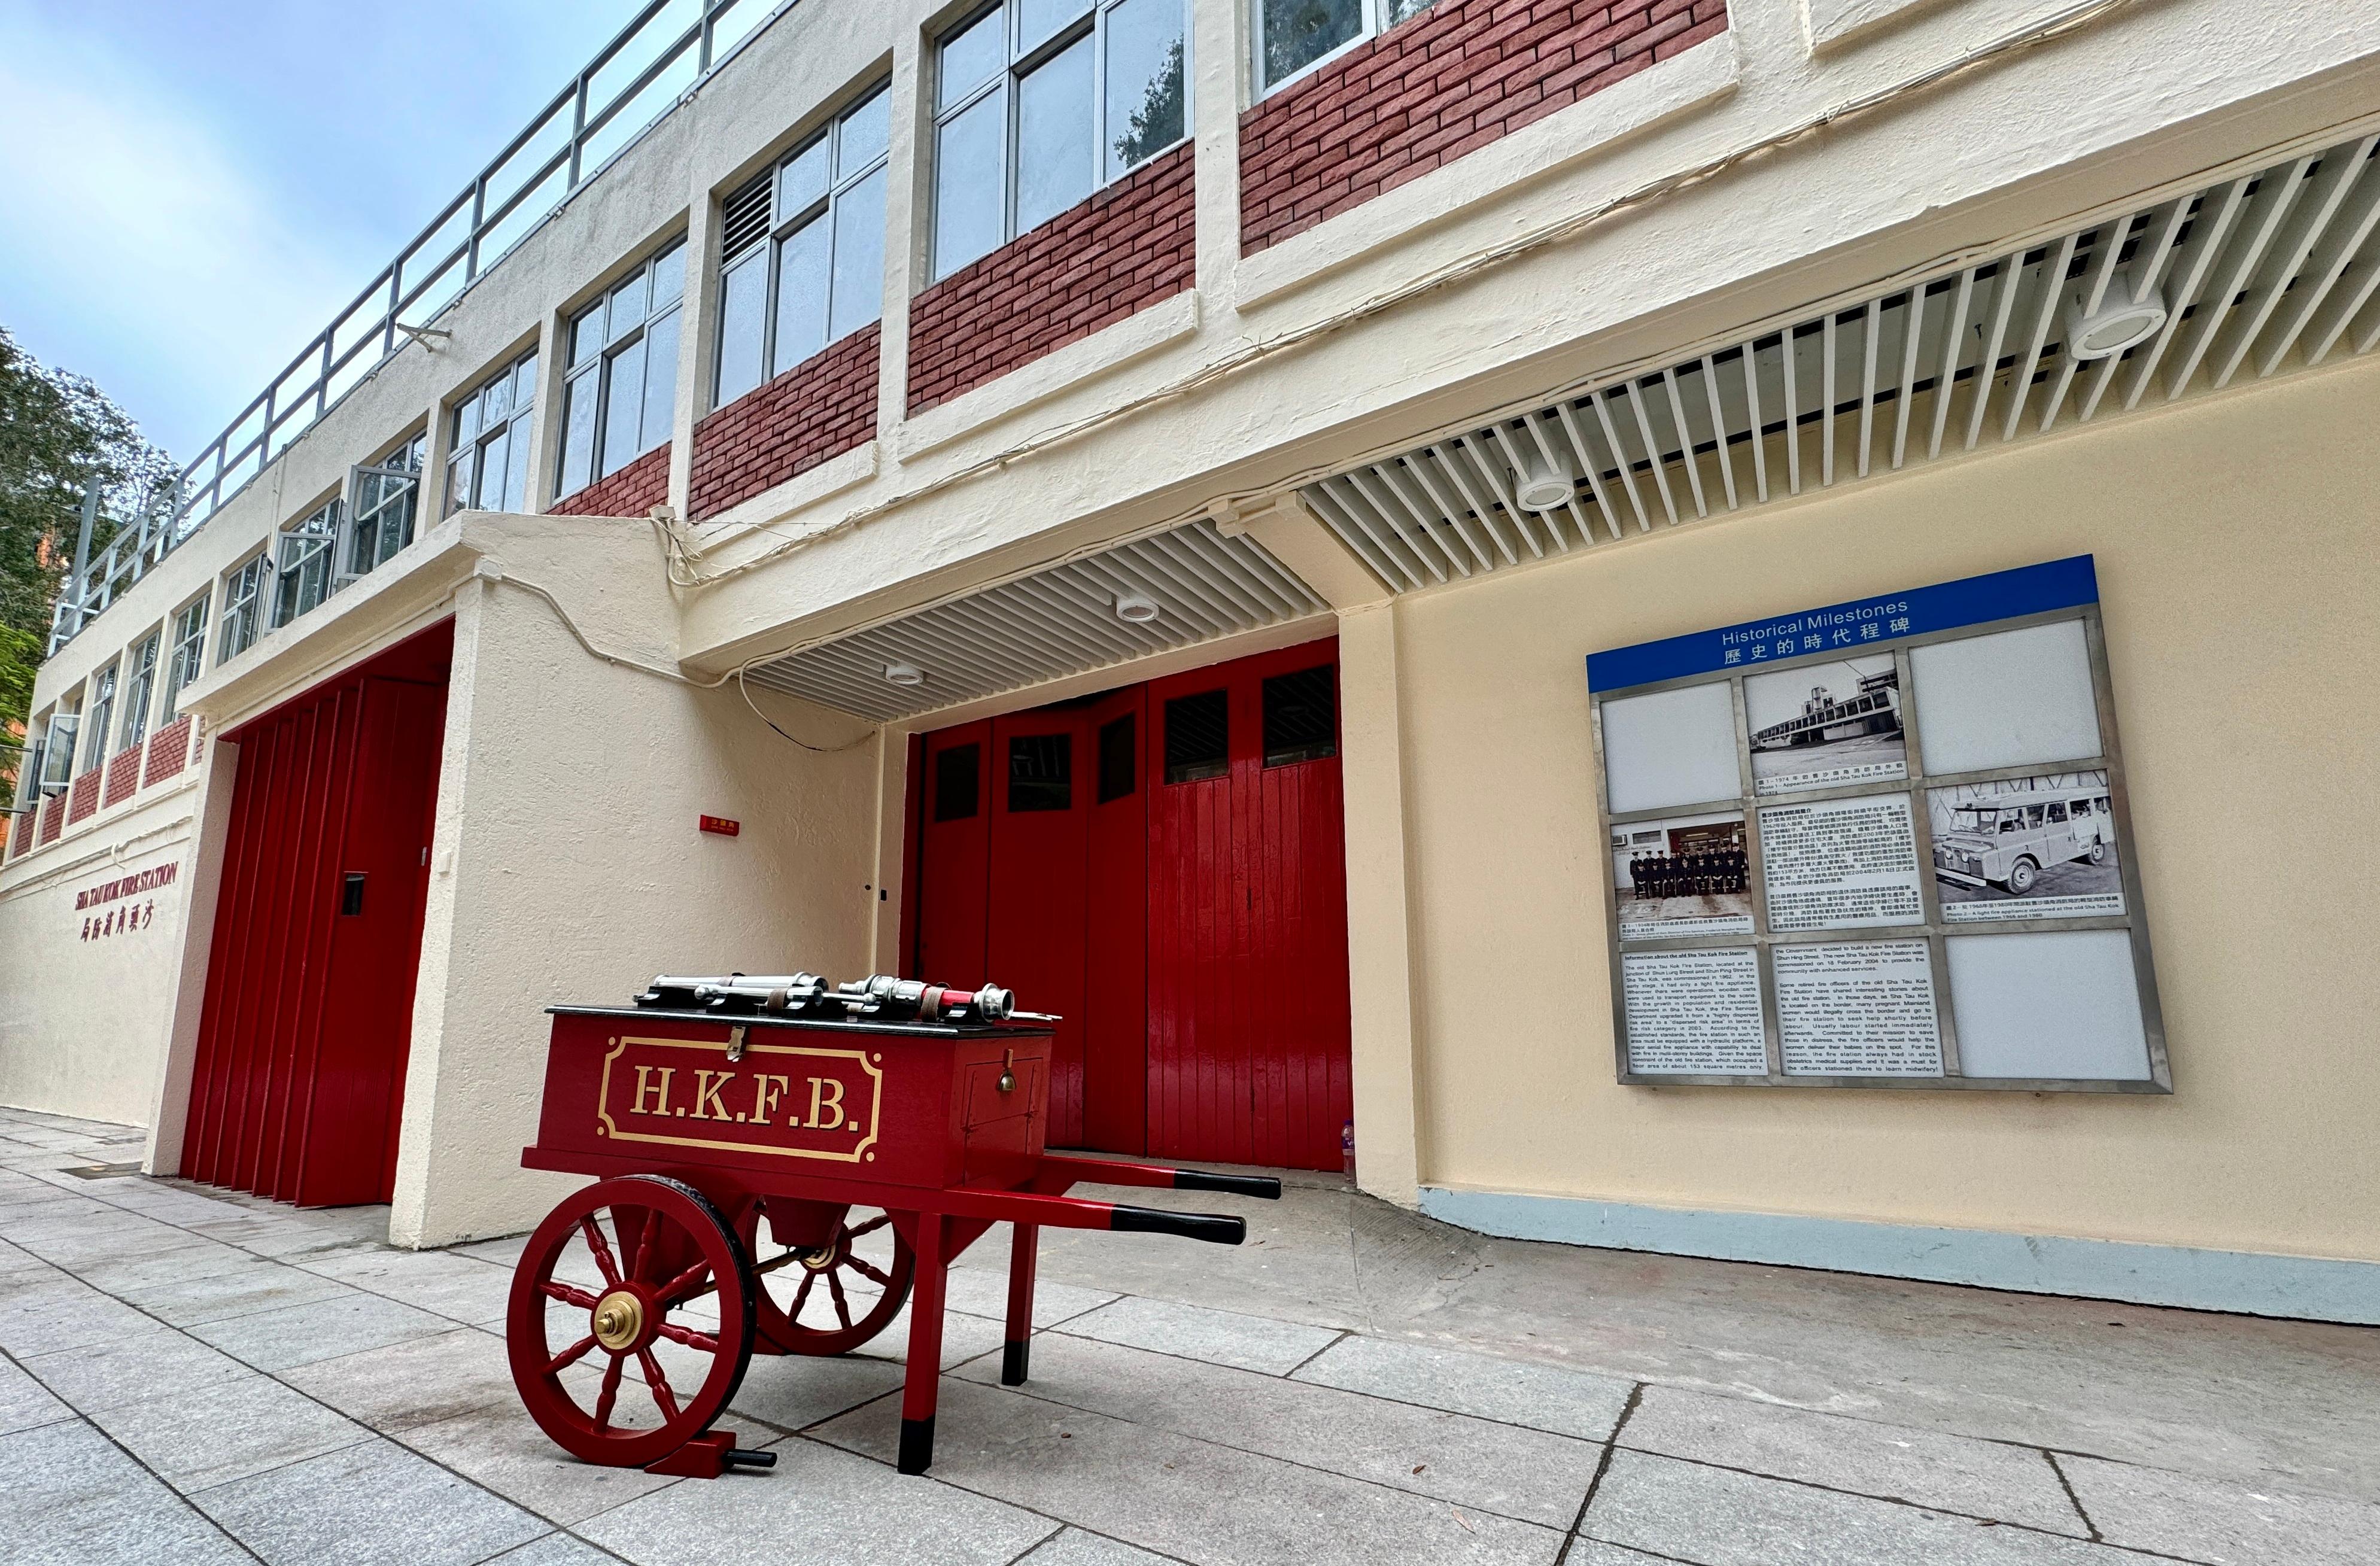 The Second Phase Opening-up of Sha Tau Kok will begin on January 1 next year. Initially, up to 1,000 tourists per day will be allowed to visit all parts of Sha Tau Kok, except Chung Ying Street, after applying online for a Closed Area Permit. Photo shows a replica of a century-old fire-fighting hand cart displayed at the entrance of the old Sha Tau Kok Fire Station.
